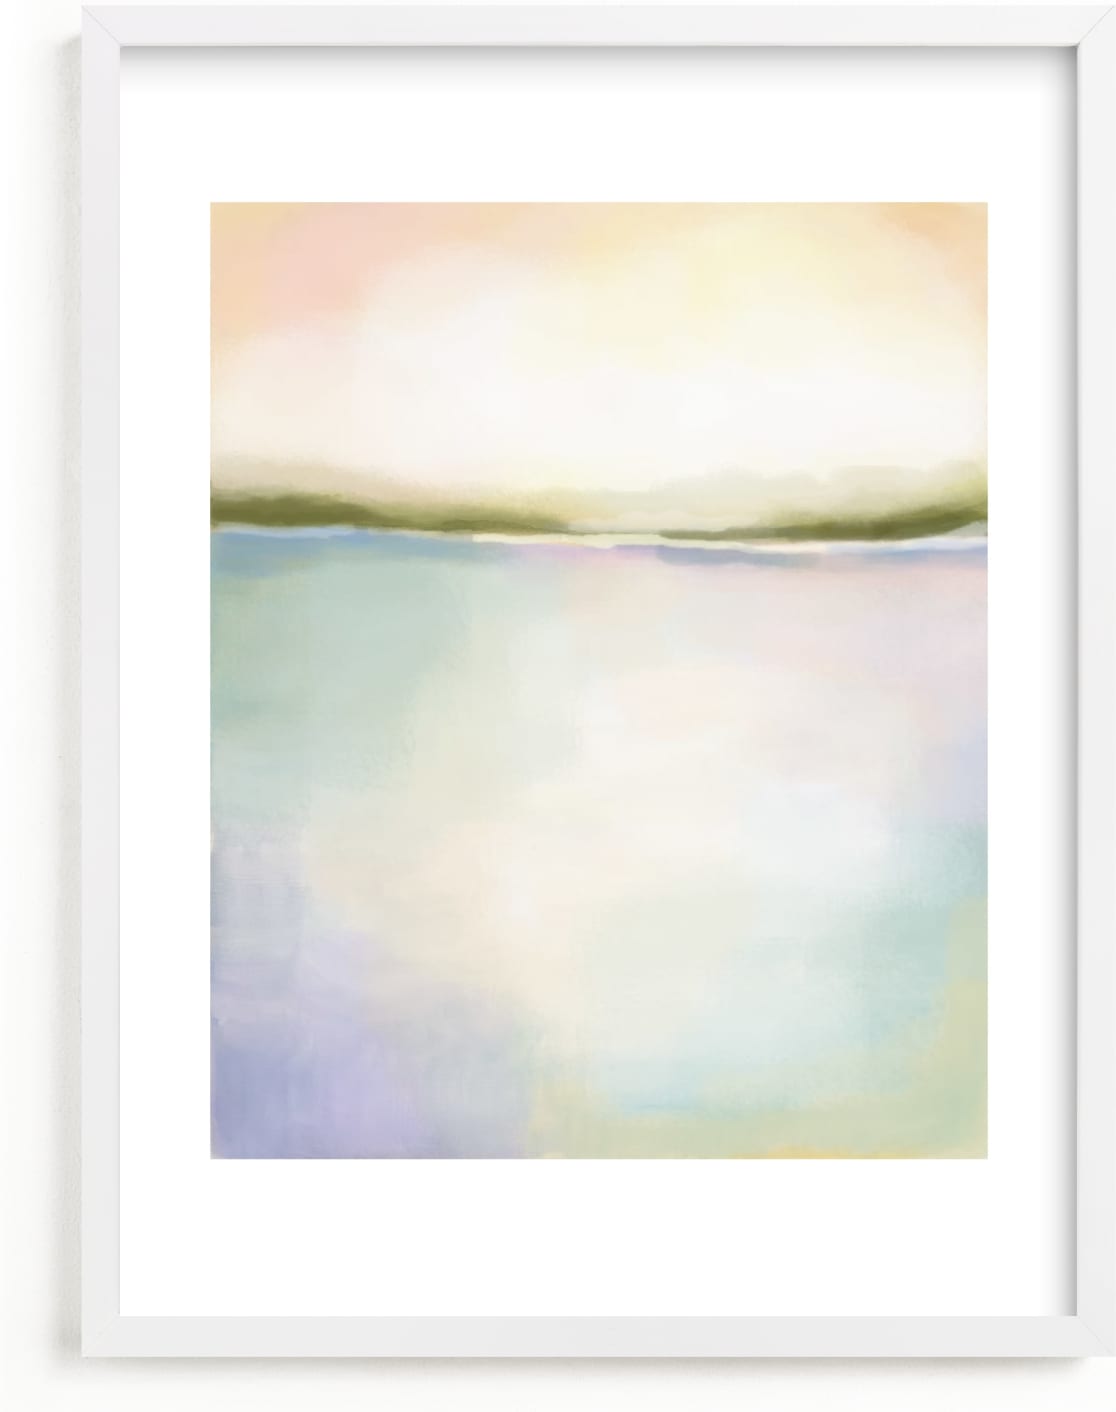 This is a blue nursery wall art by AlisonJerry called Coral Bay.